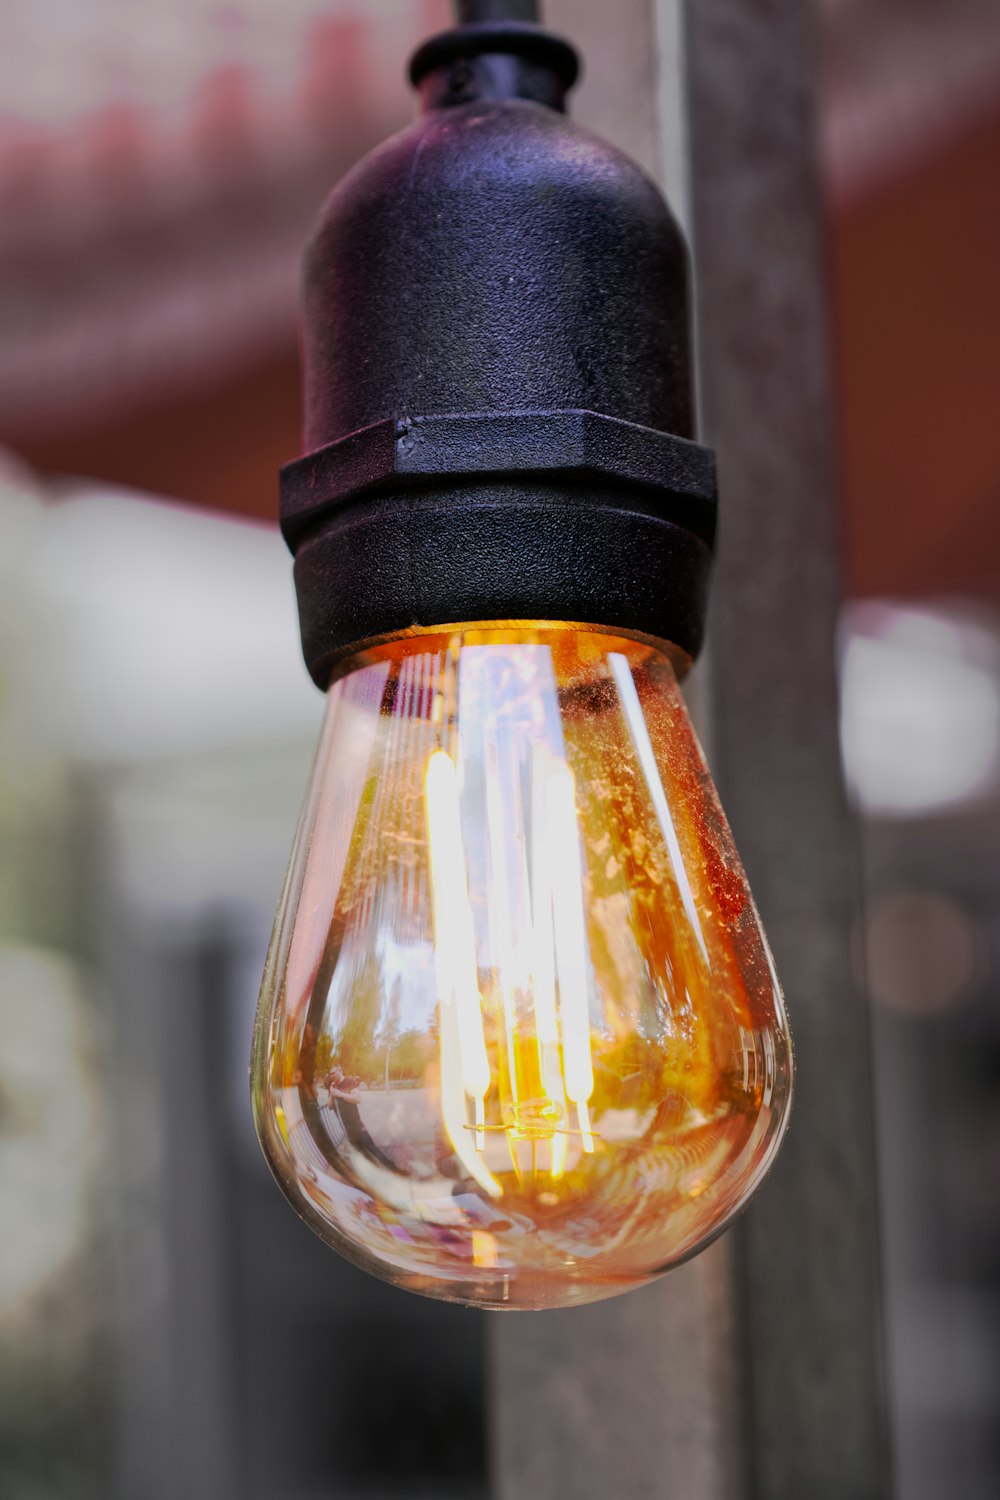 a close up of a light bulb attached to a pole